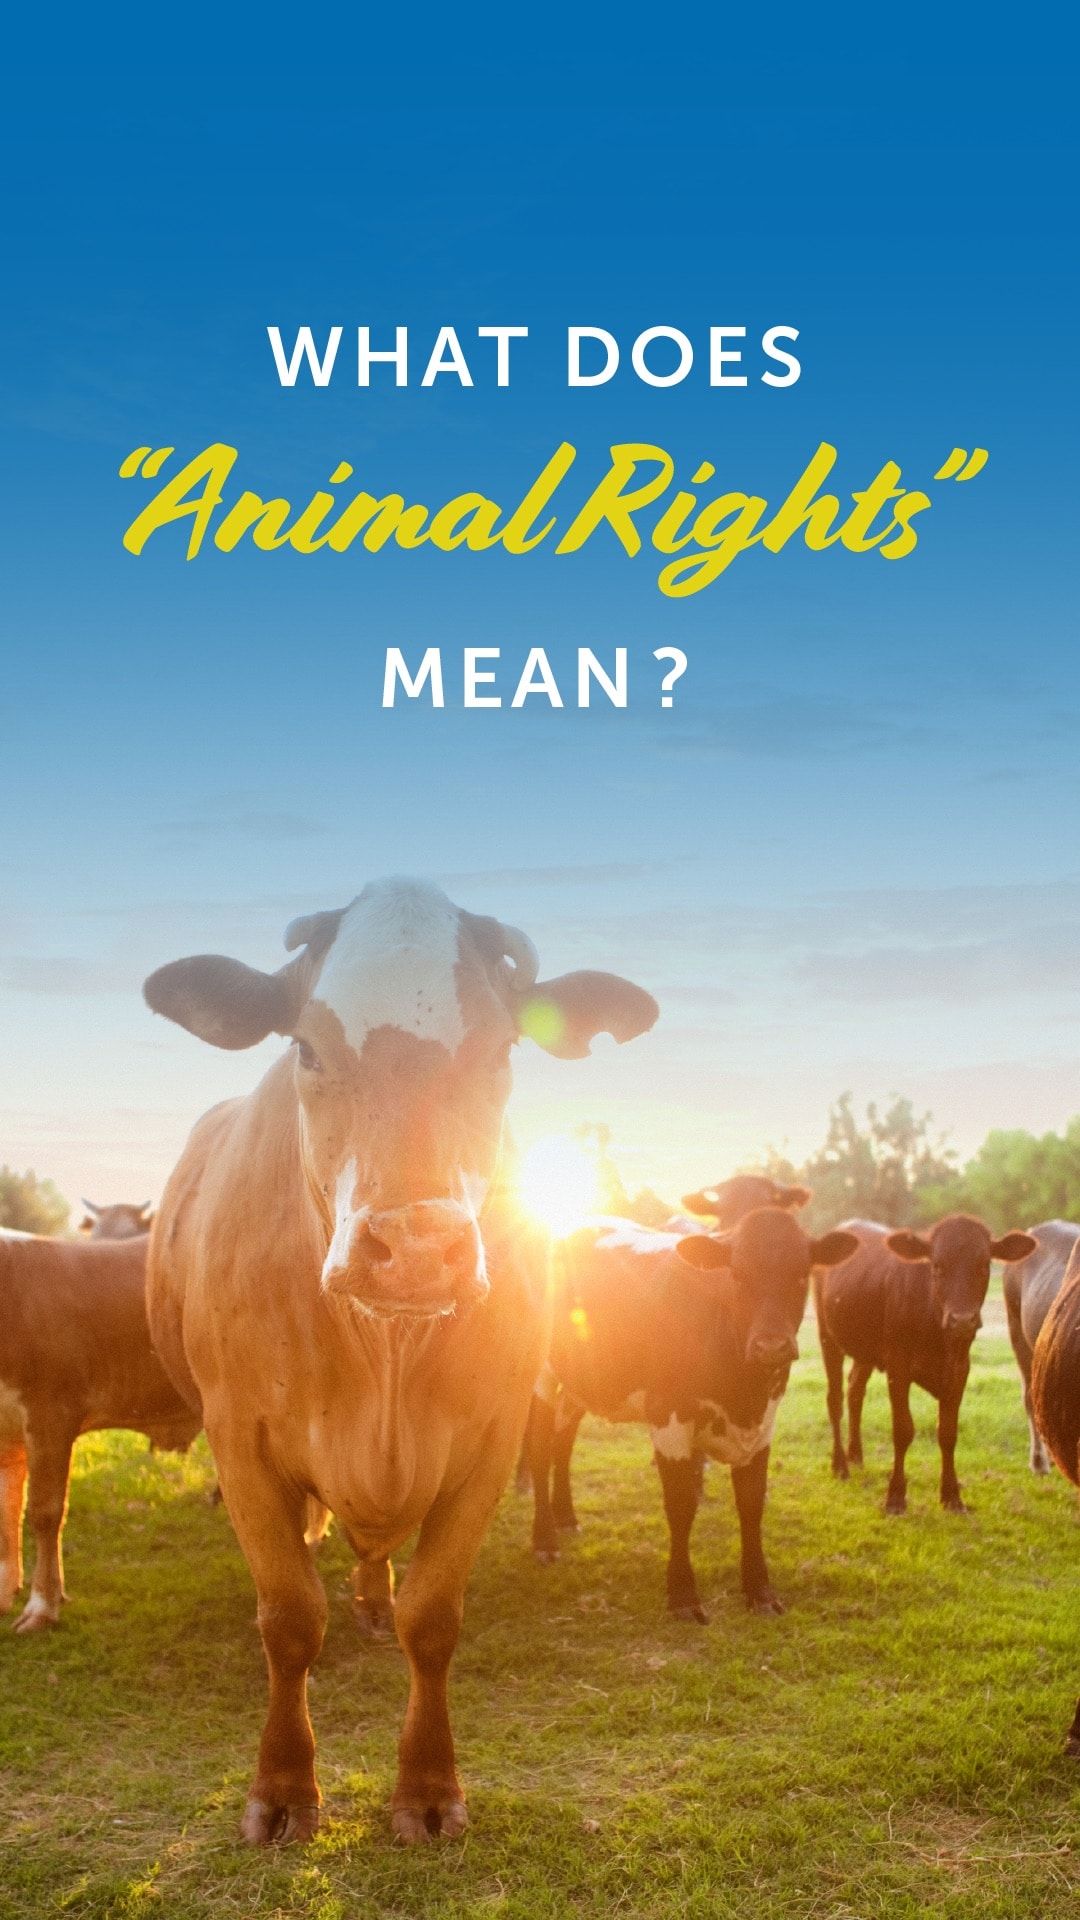 What Does “Animal Rights” Mean?